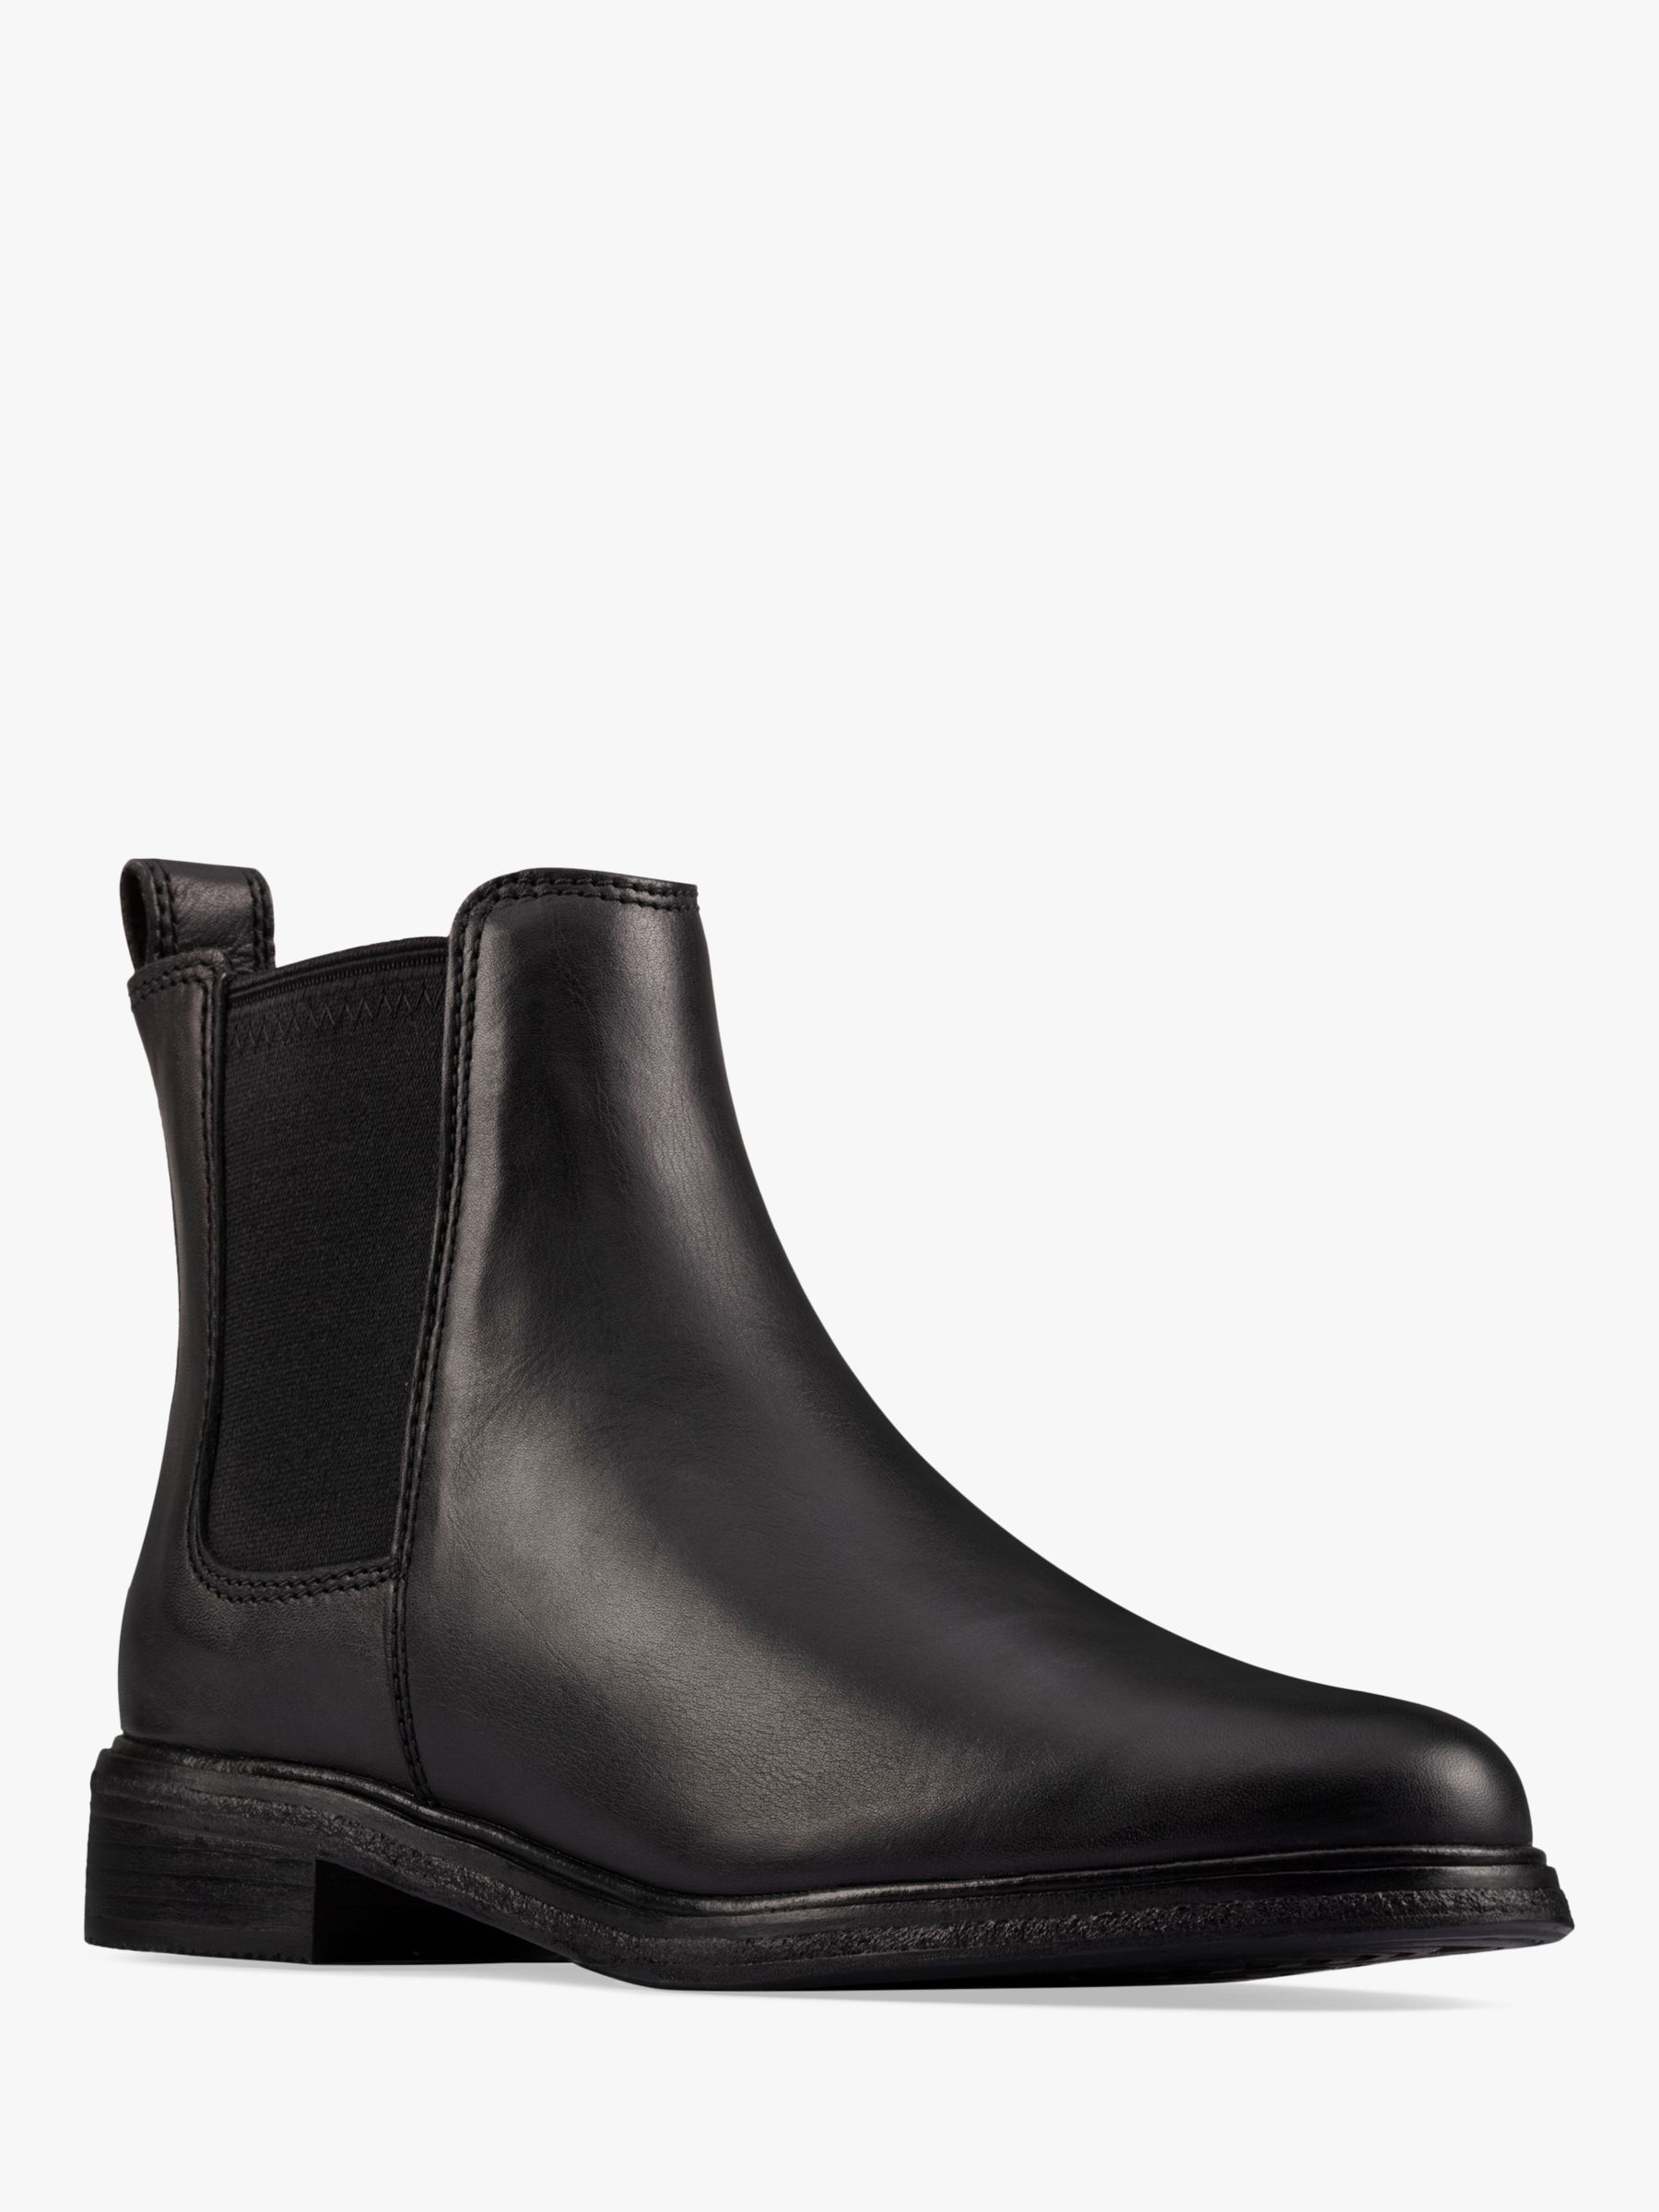 Clarks Clarkdale Leather Chelsea Boots, Black at John Lewis & Partners